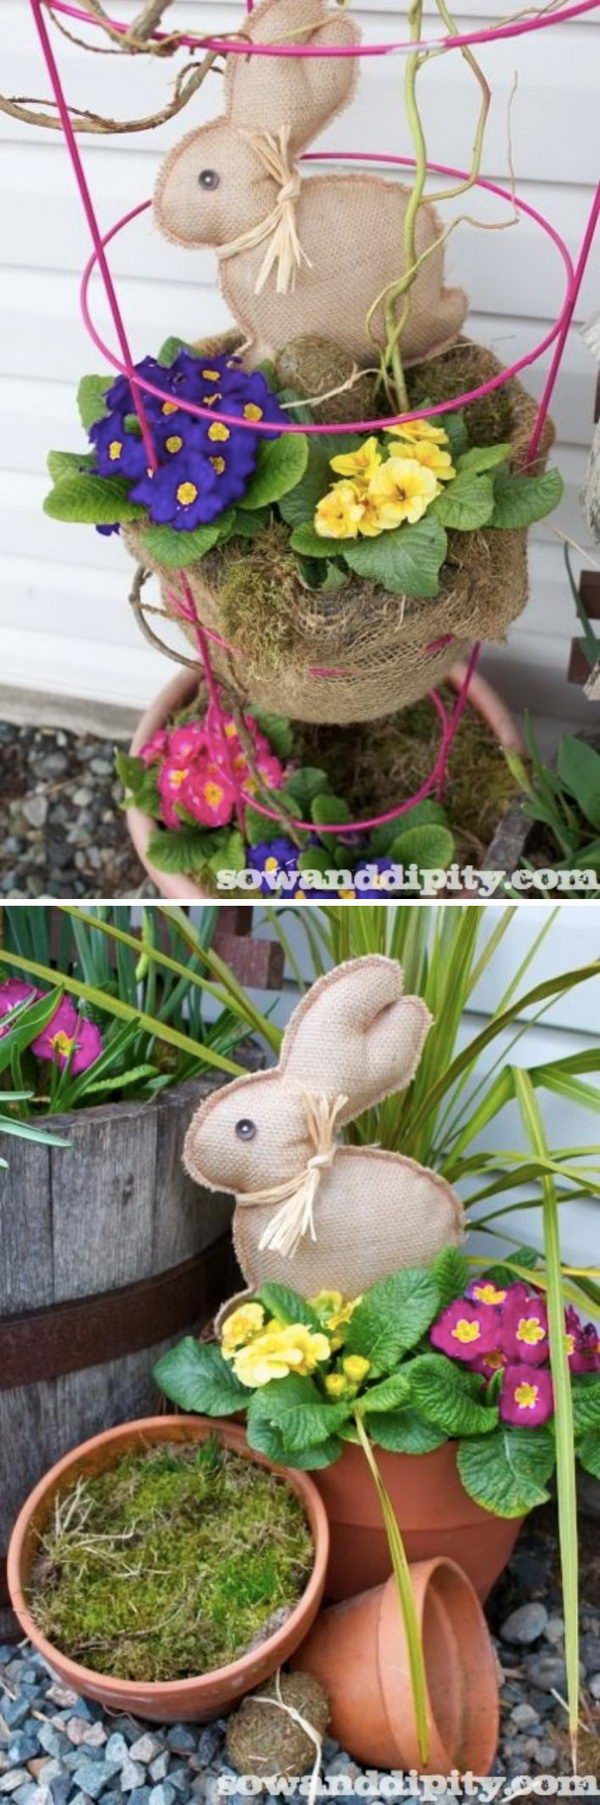 30 DIY Easter Outdoor Decorations 2017